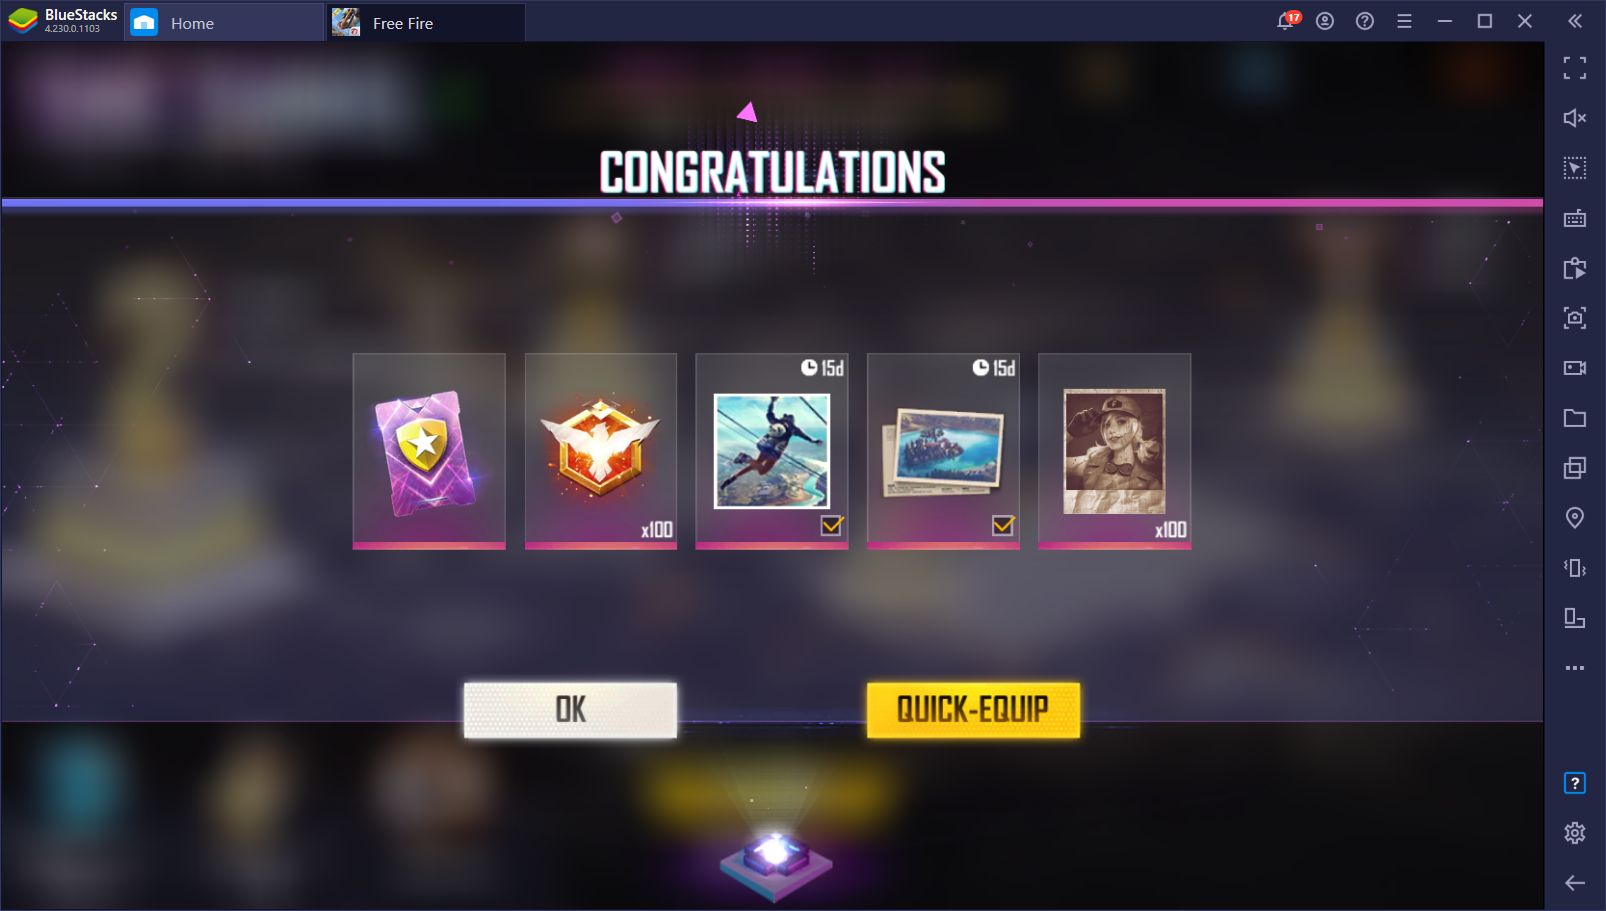 Free Fire 3rd Anniversary - How to Farm Event Currency and Claim Unique Rewards